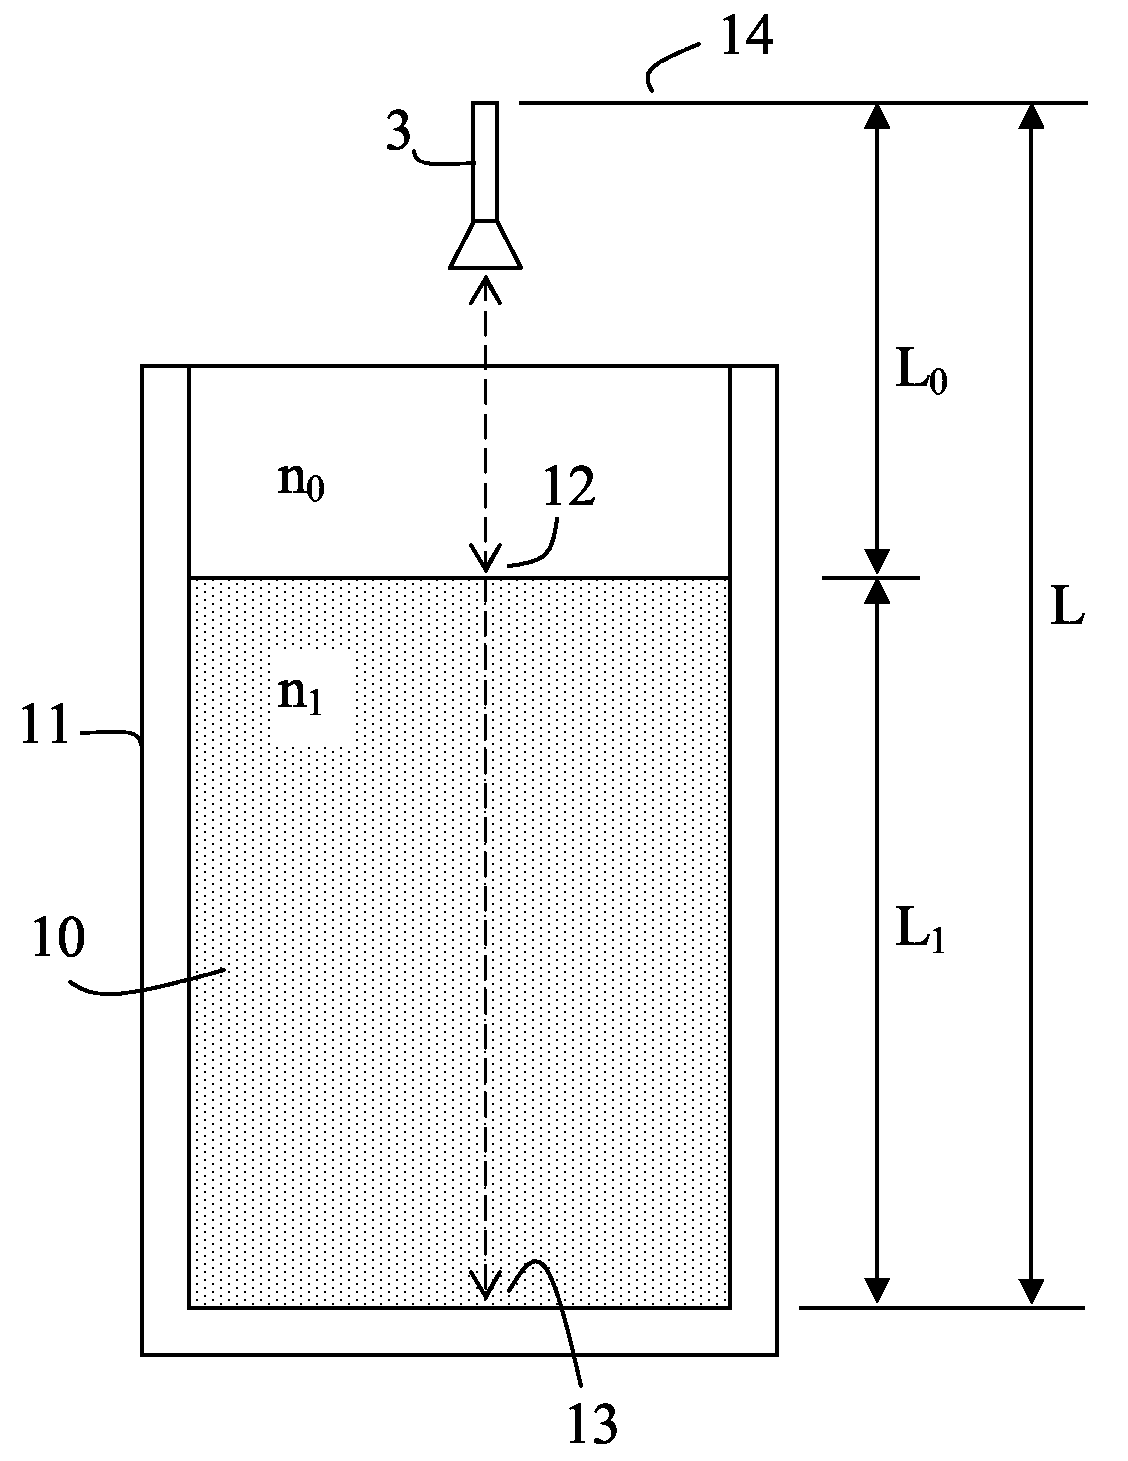 Method for analysing a substance in a container